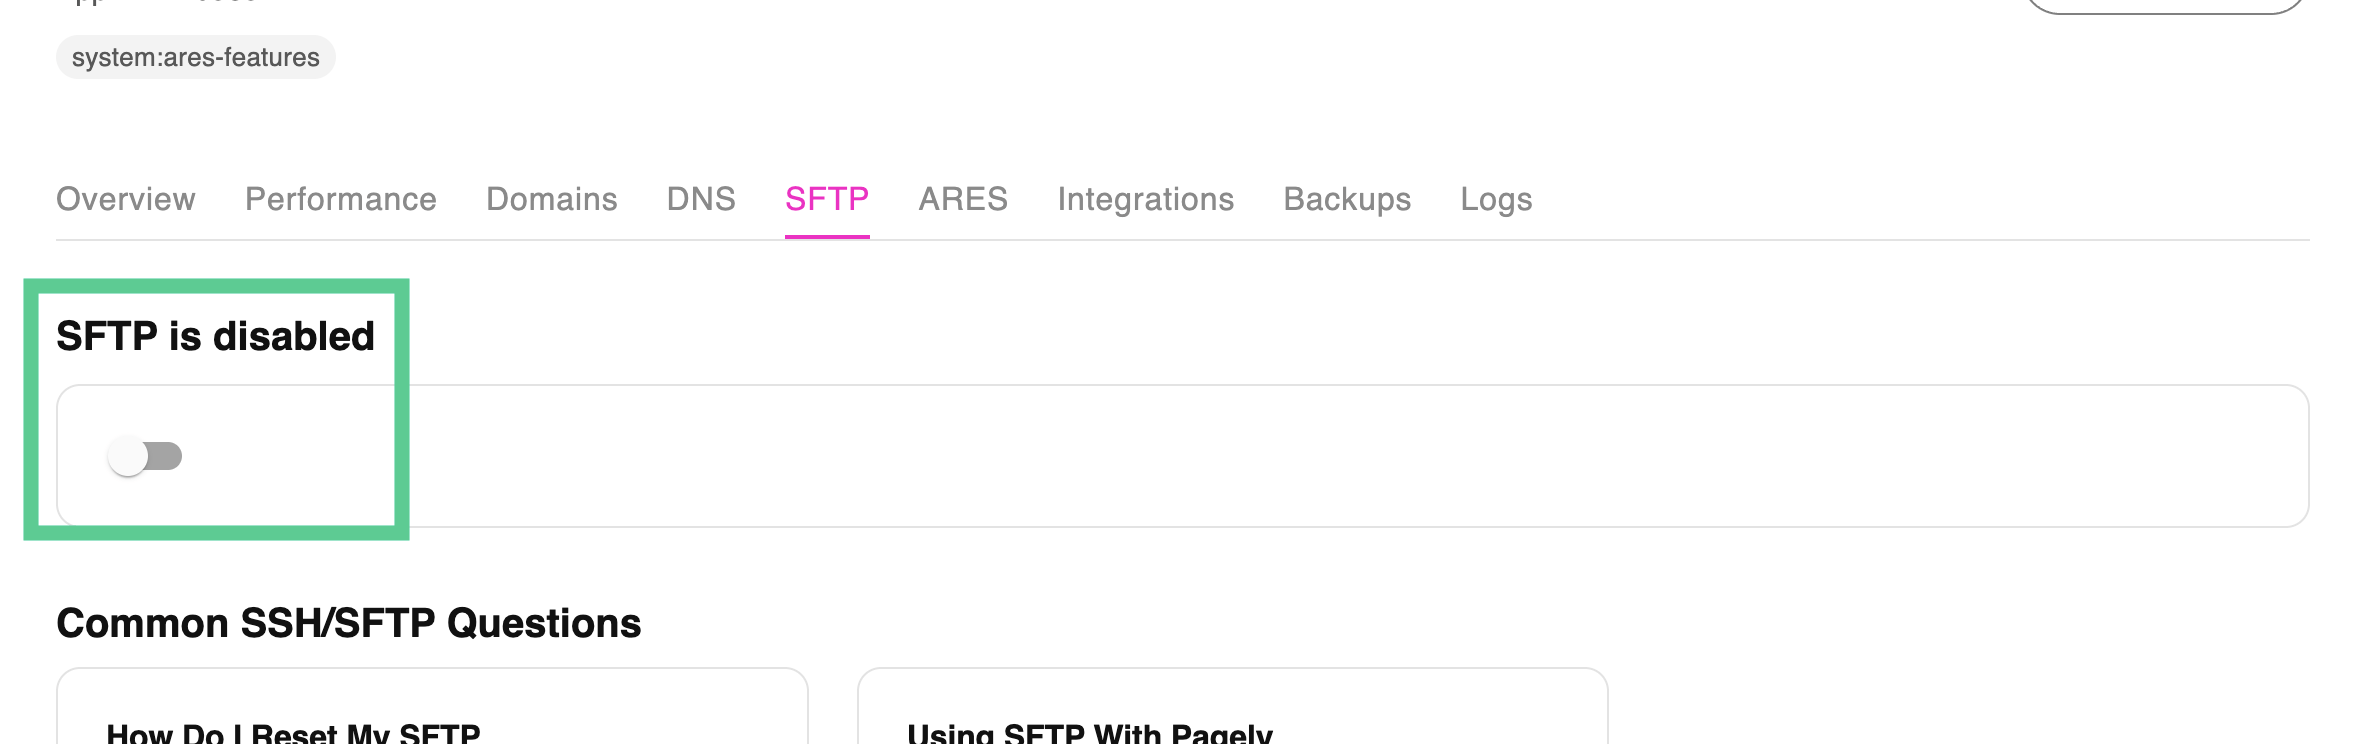 Enable SFTP